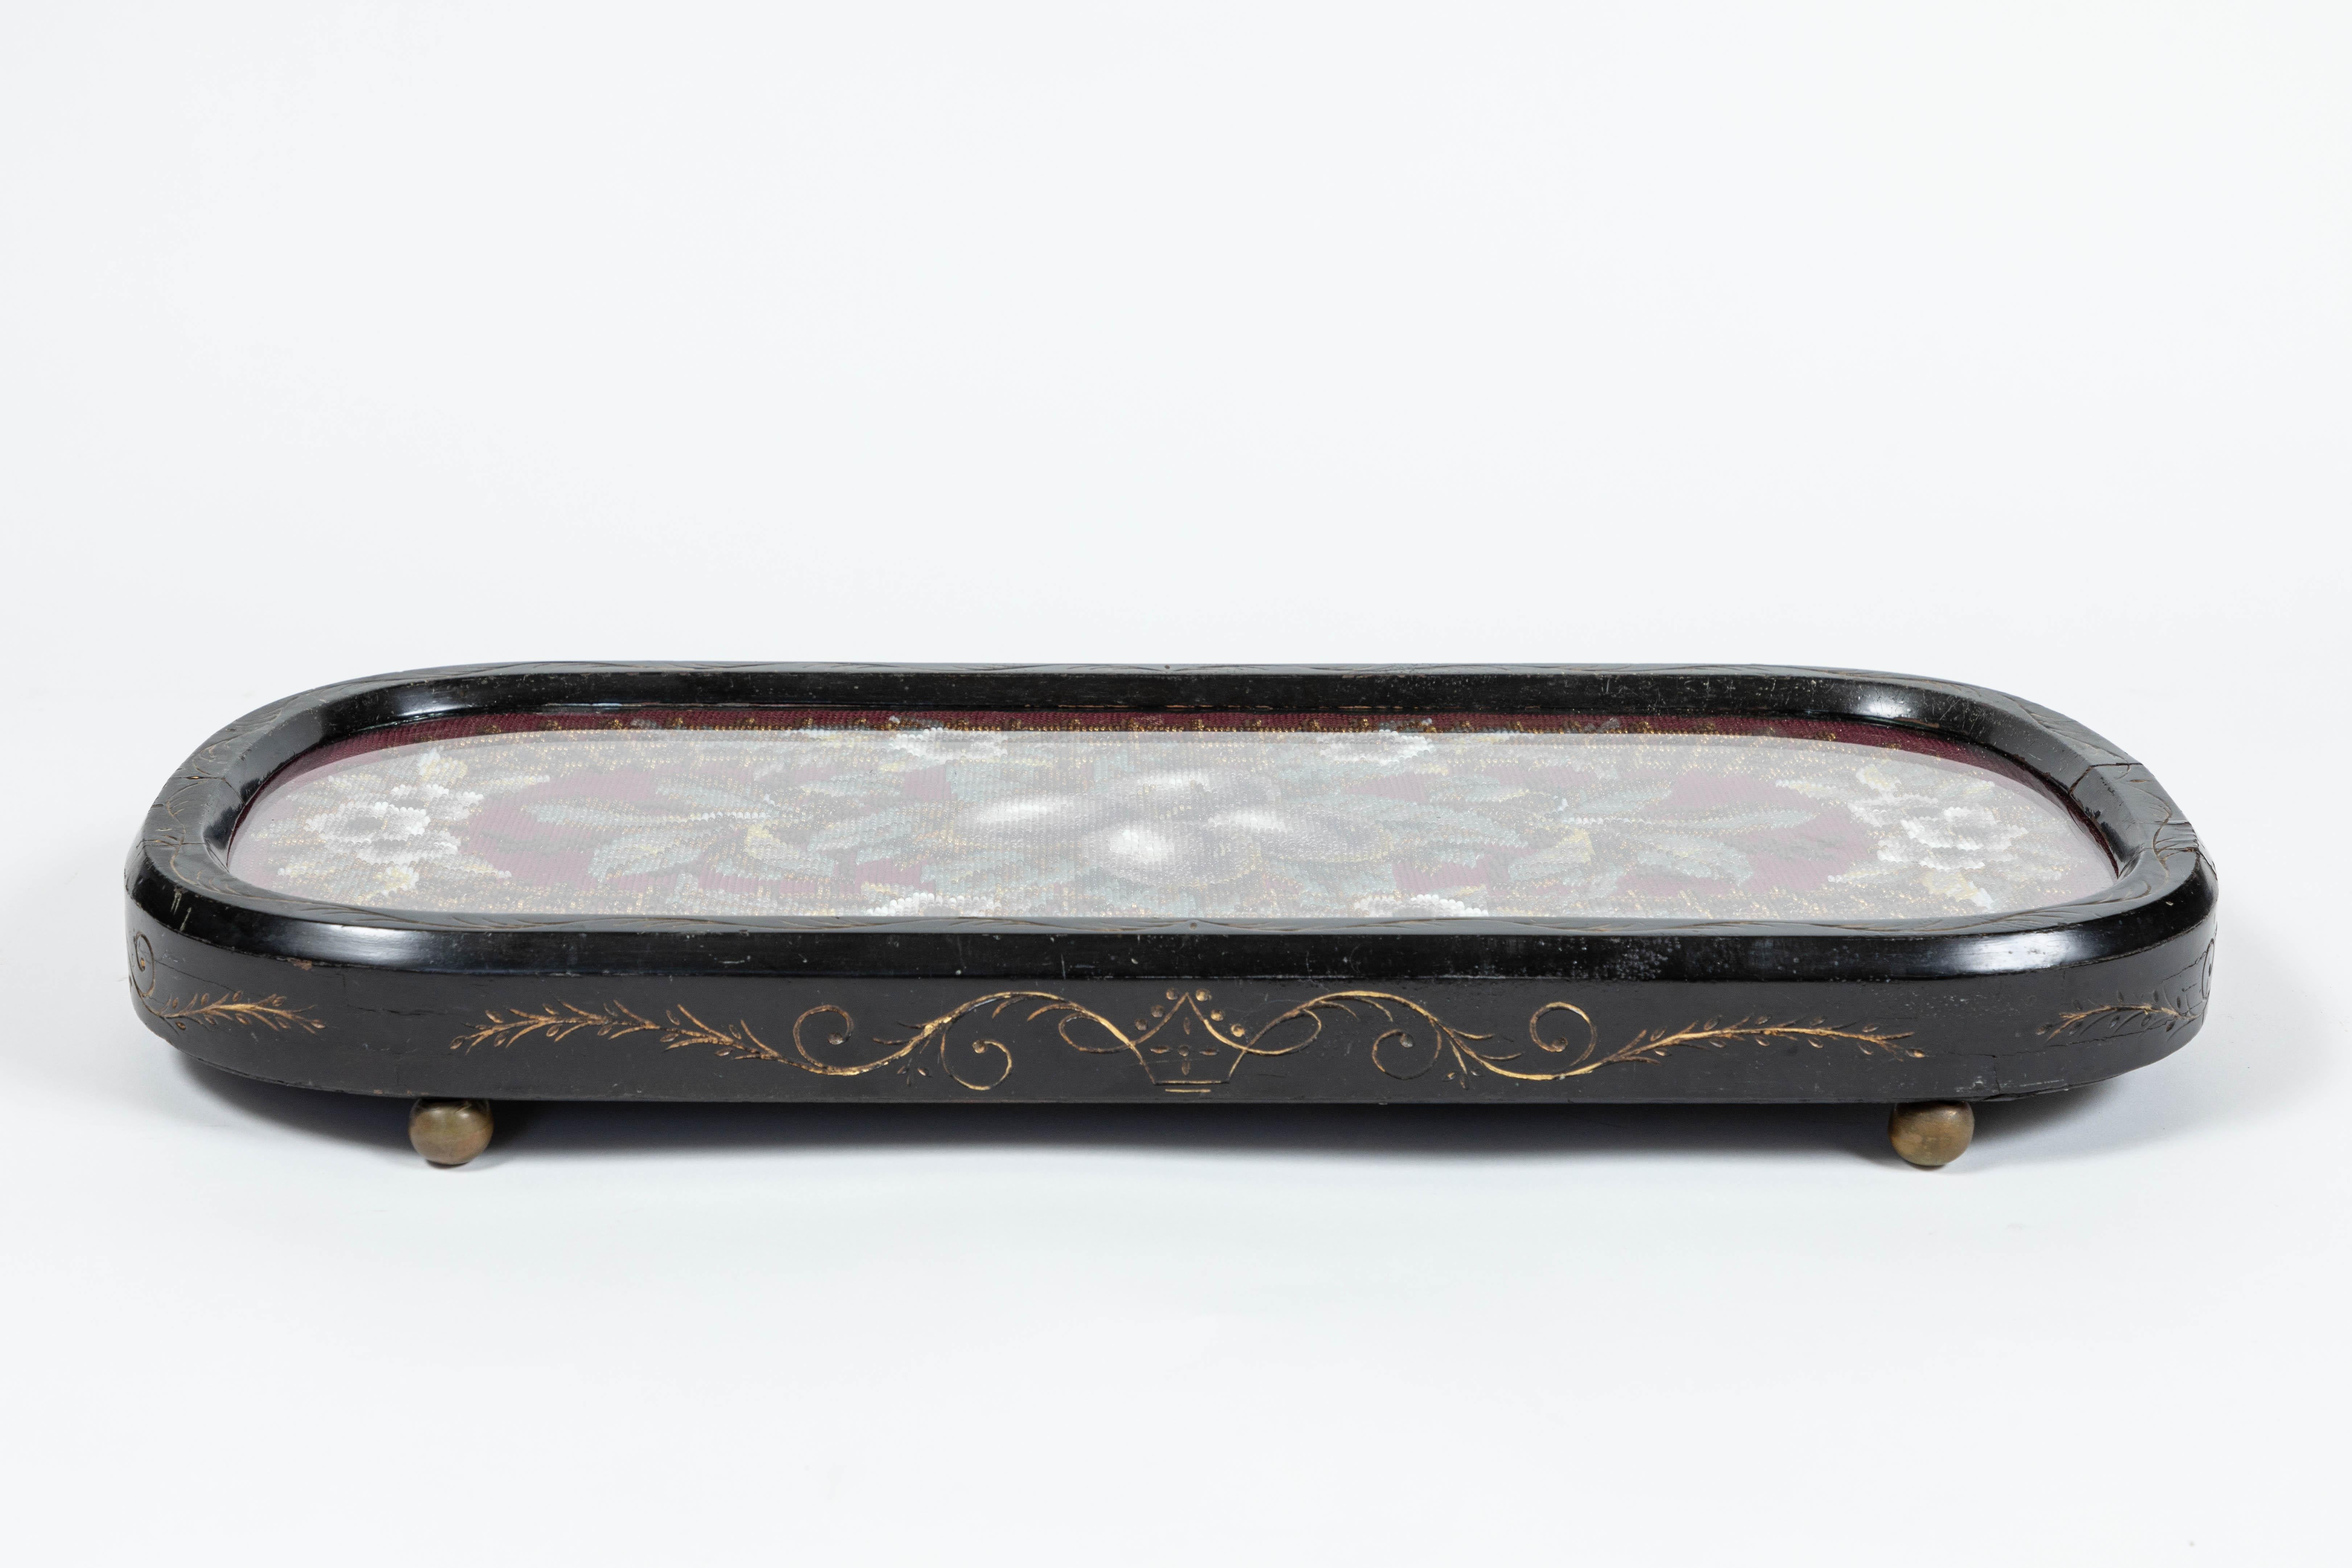 Antique Eastlake wood tray with beaded needlepoint panel under glass, circa 1850-1880.